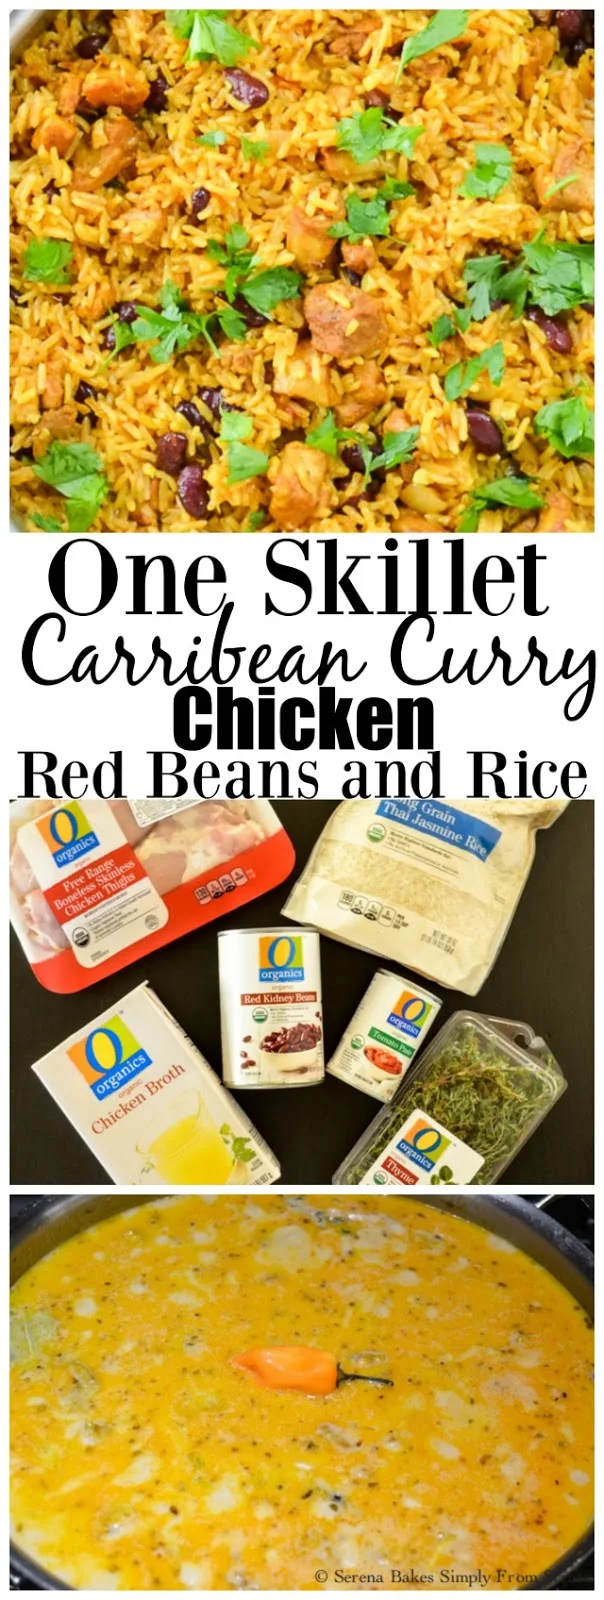 One Skillet Caribbean Curry Chicken Red Beans and Rice an easy dinner in under 30 minutes!  serenabakessimplyfromscratch.com